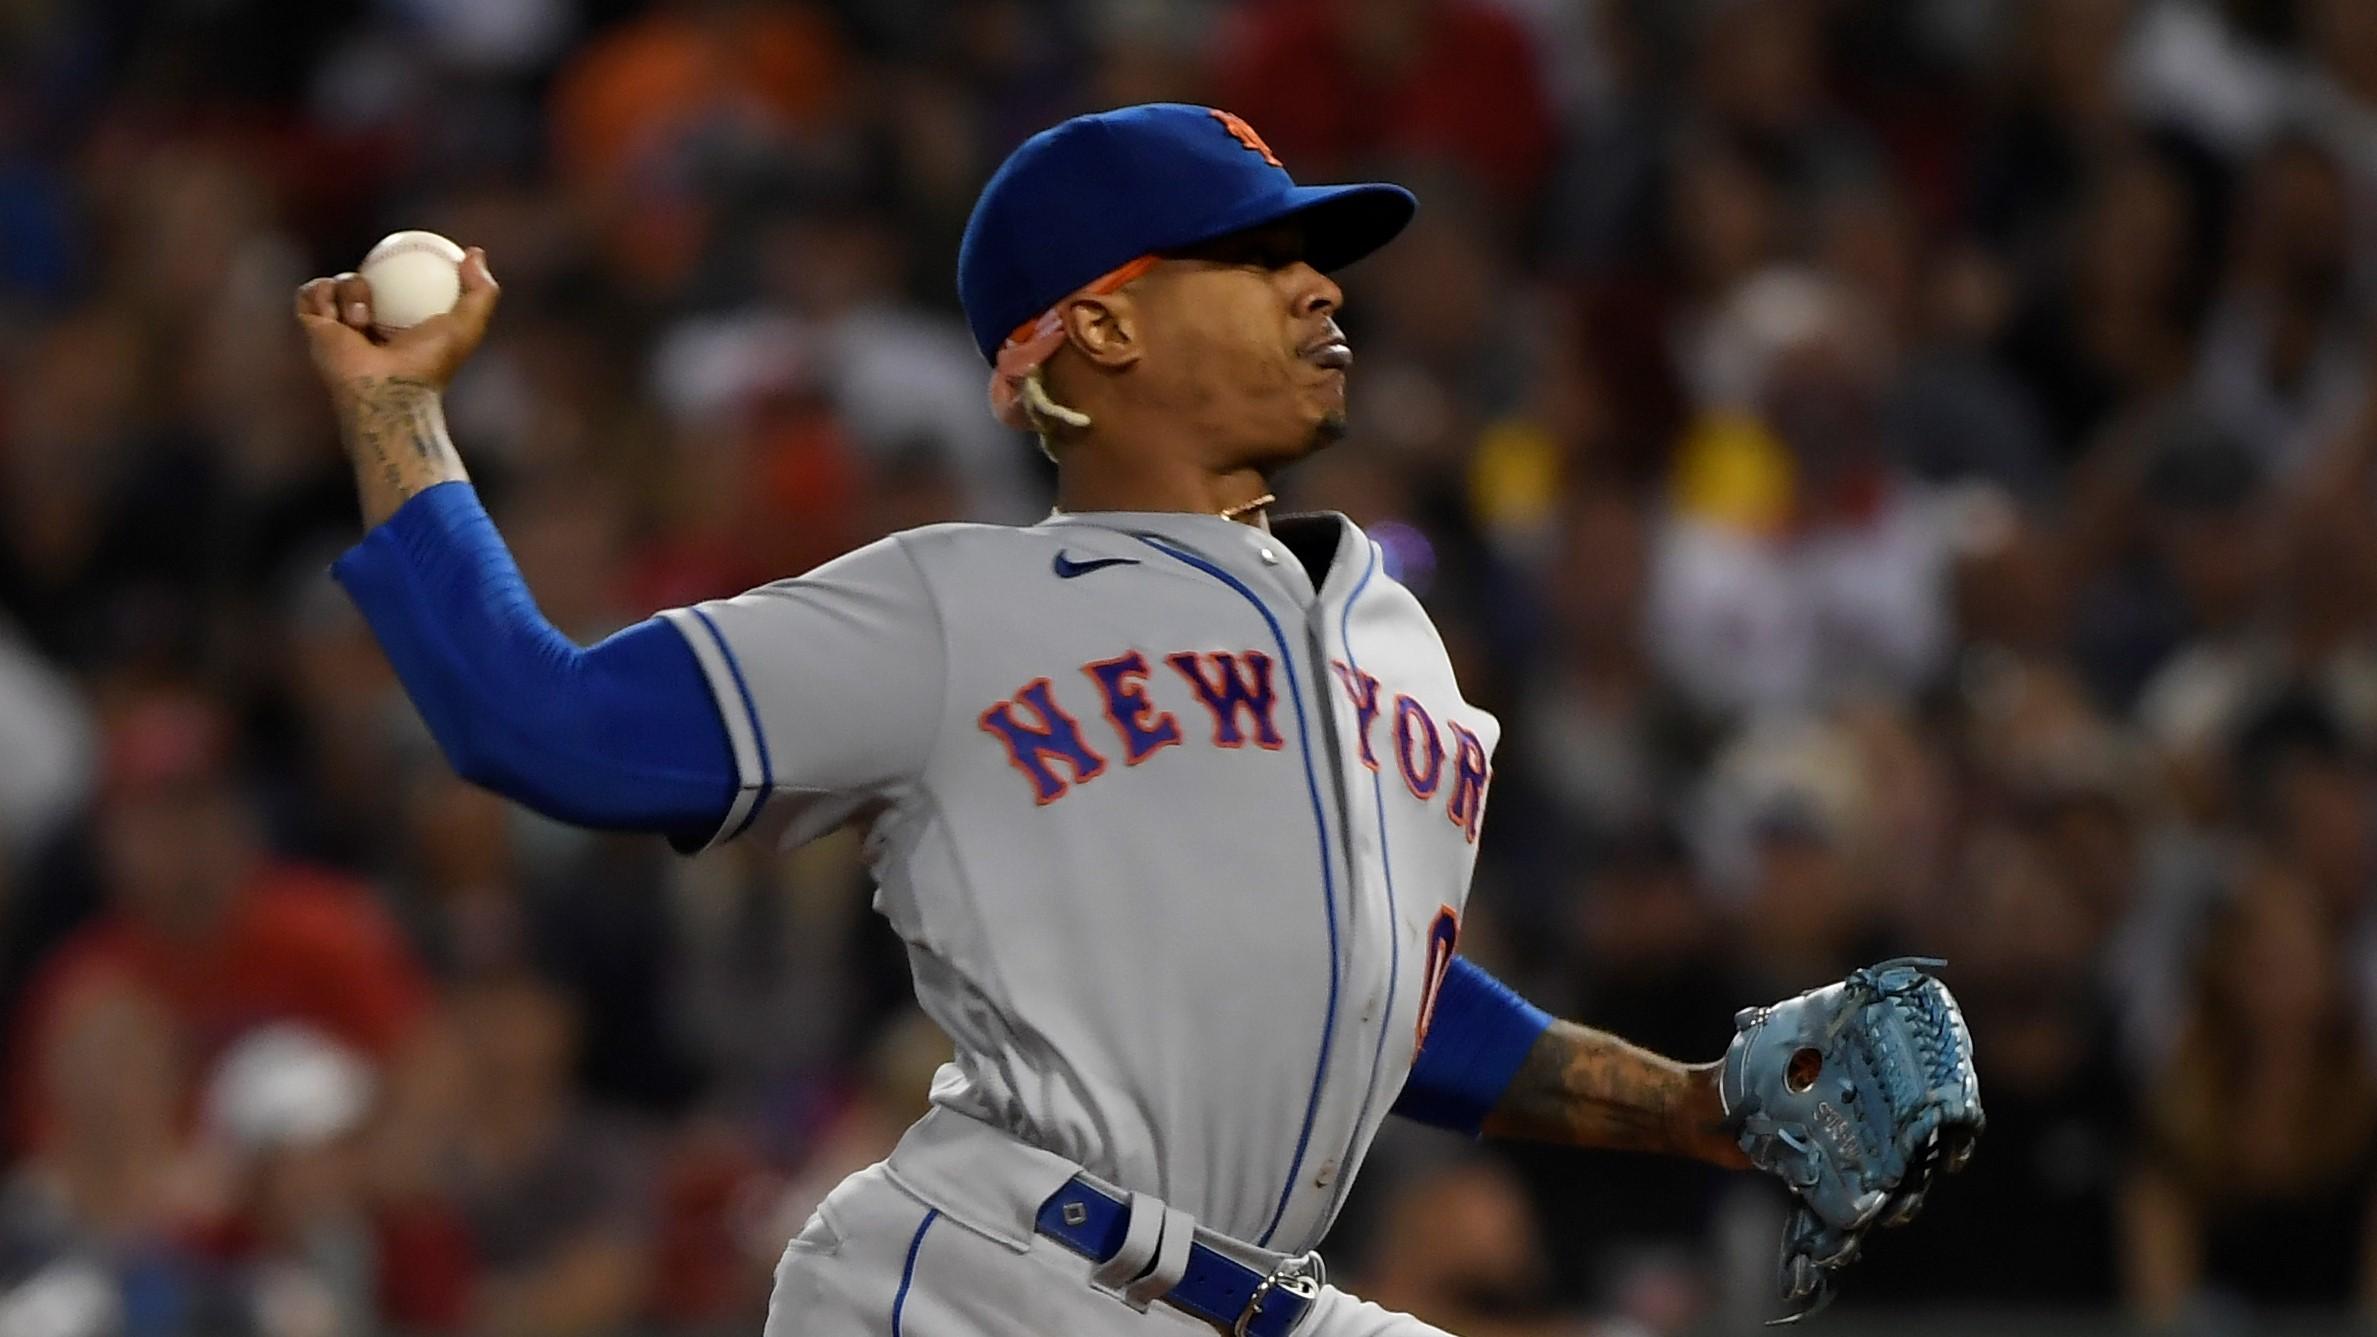 Sep 21, 2021; Boston, Massachusetts, USA; New York Mets starting pitcher Marcus Stroman (0) delivers against the Boston Red Sox during the third inning at Fenway Park. Mandatory Credit: Bob DeChiara-USA TODAY Sports / Bob DeChiara-USA TODAY Sports